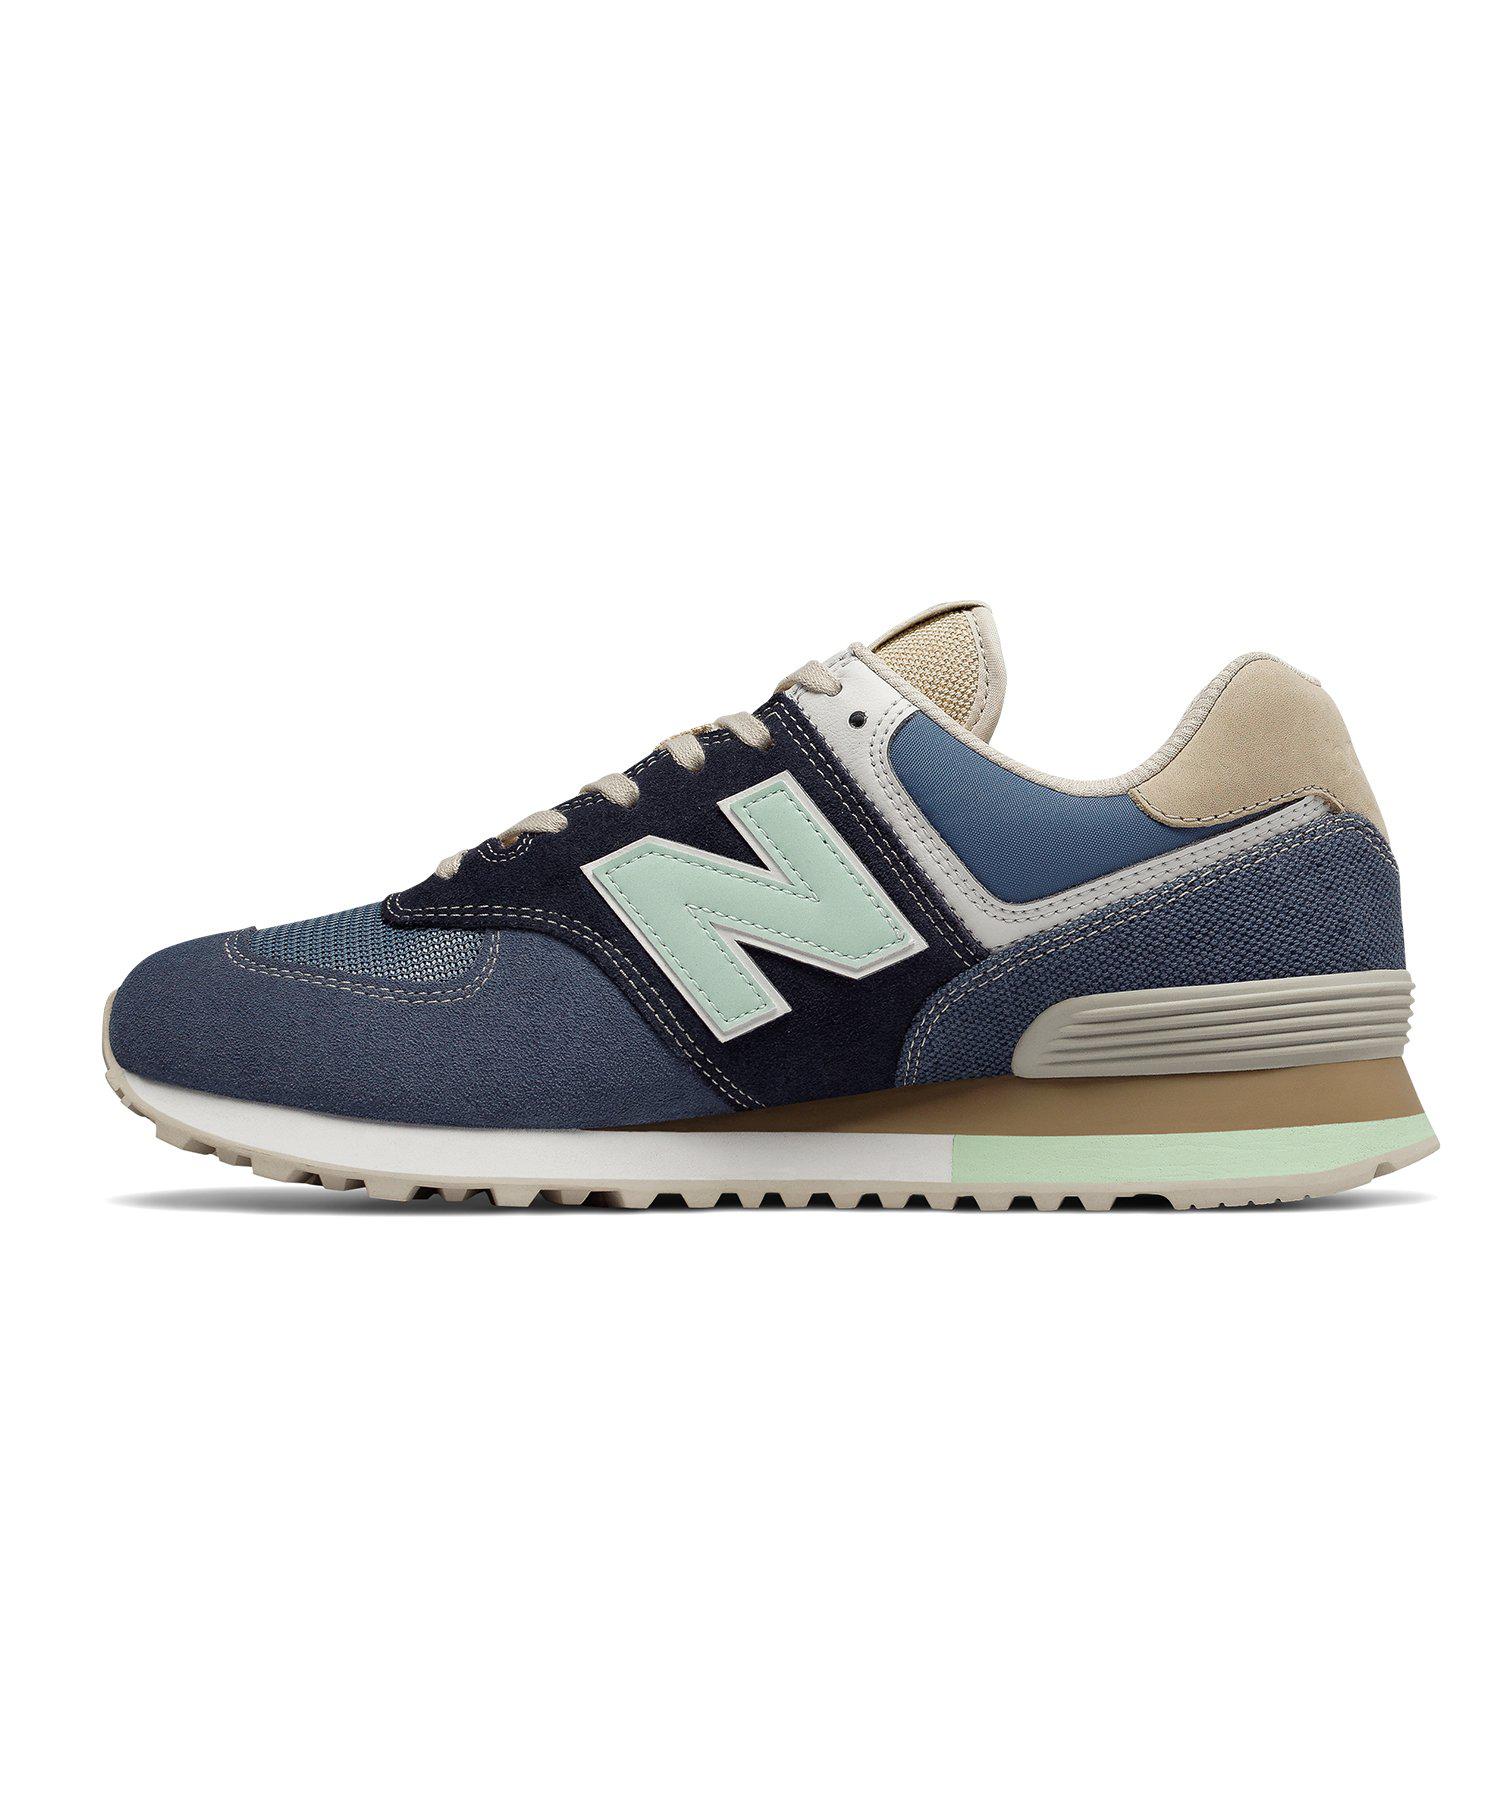 New Balance Suede 574 Retro Surf In Blue for Men - Lyst